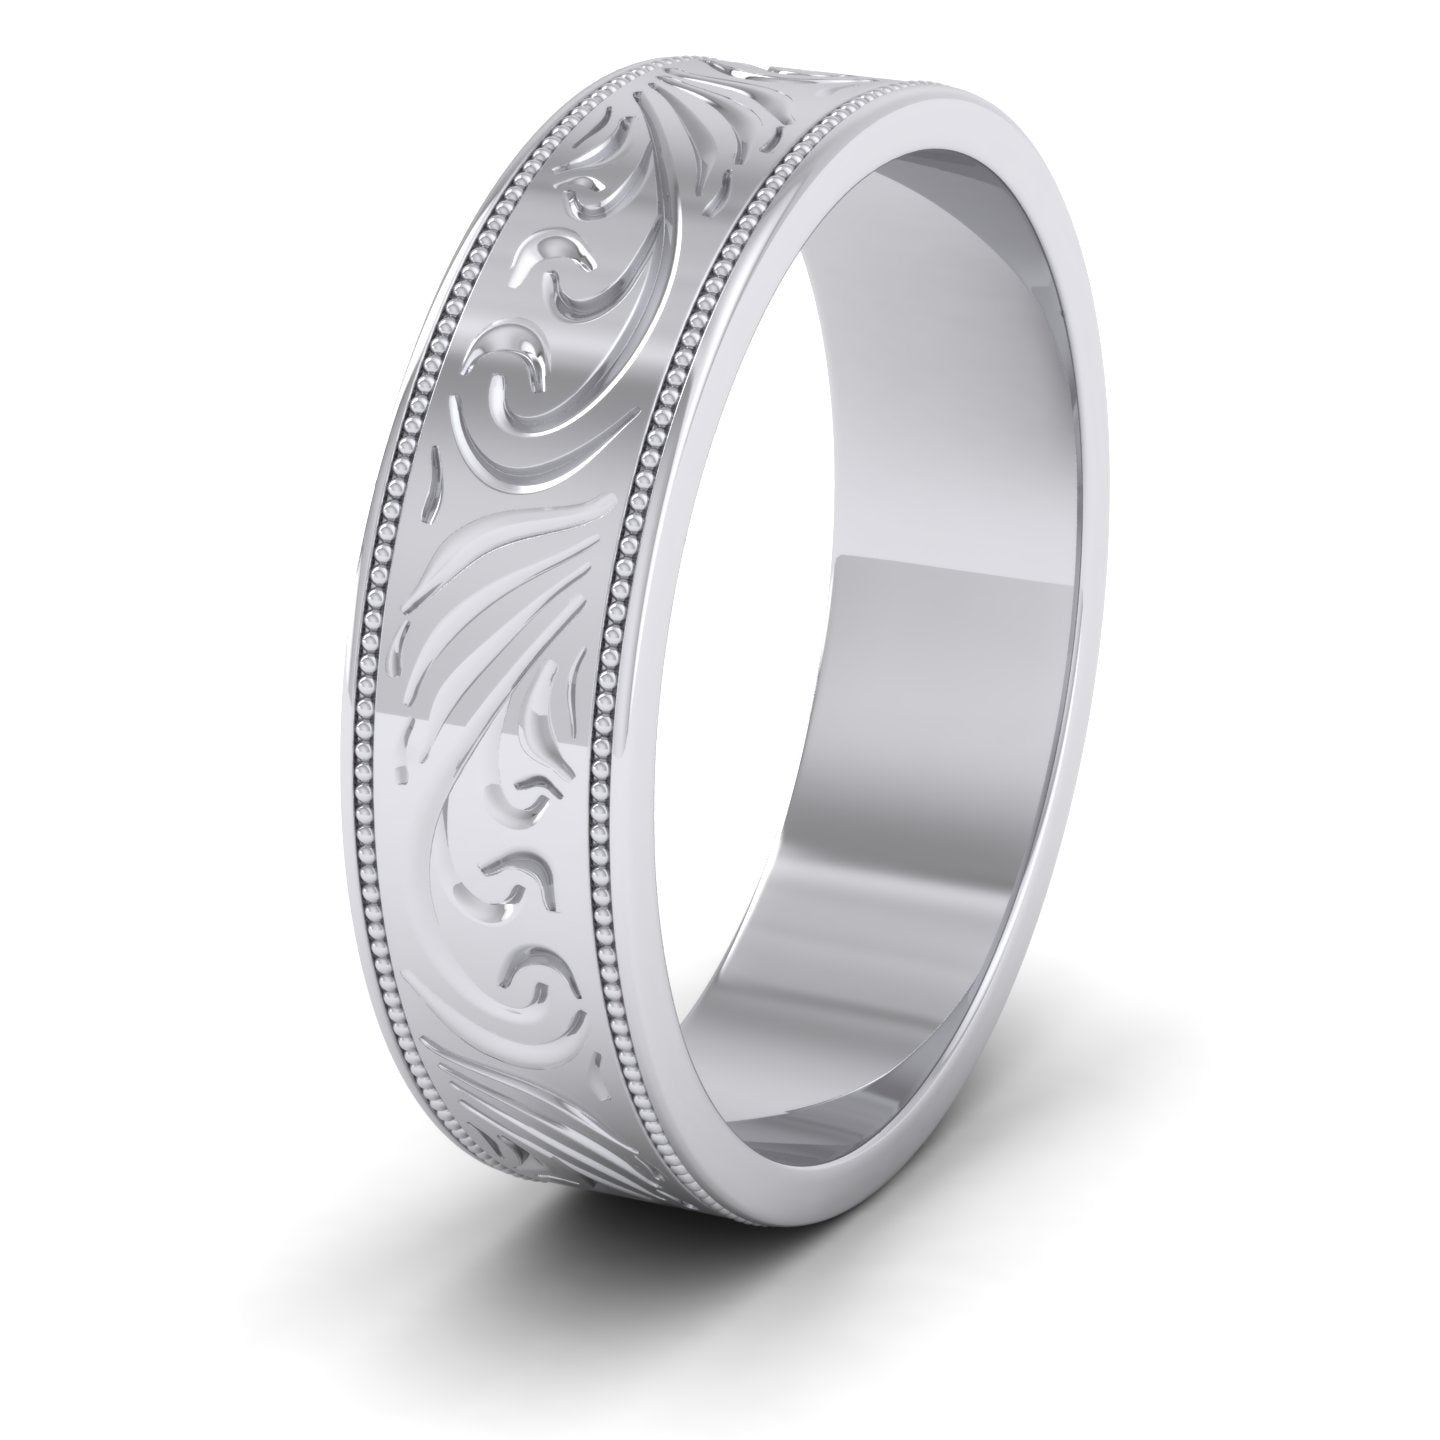 Engraved 14ct White Gold 6mm Flat Wedding Ring With Millgrain Edge